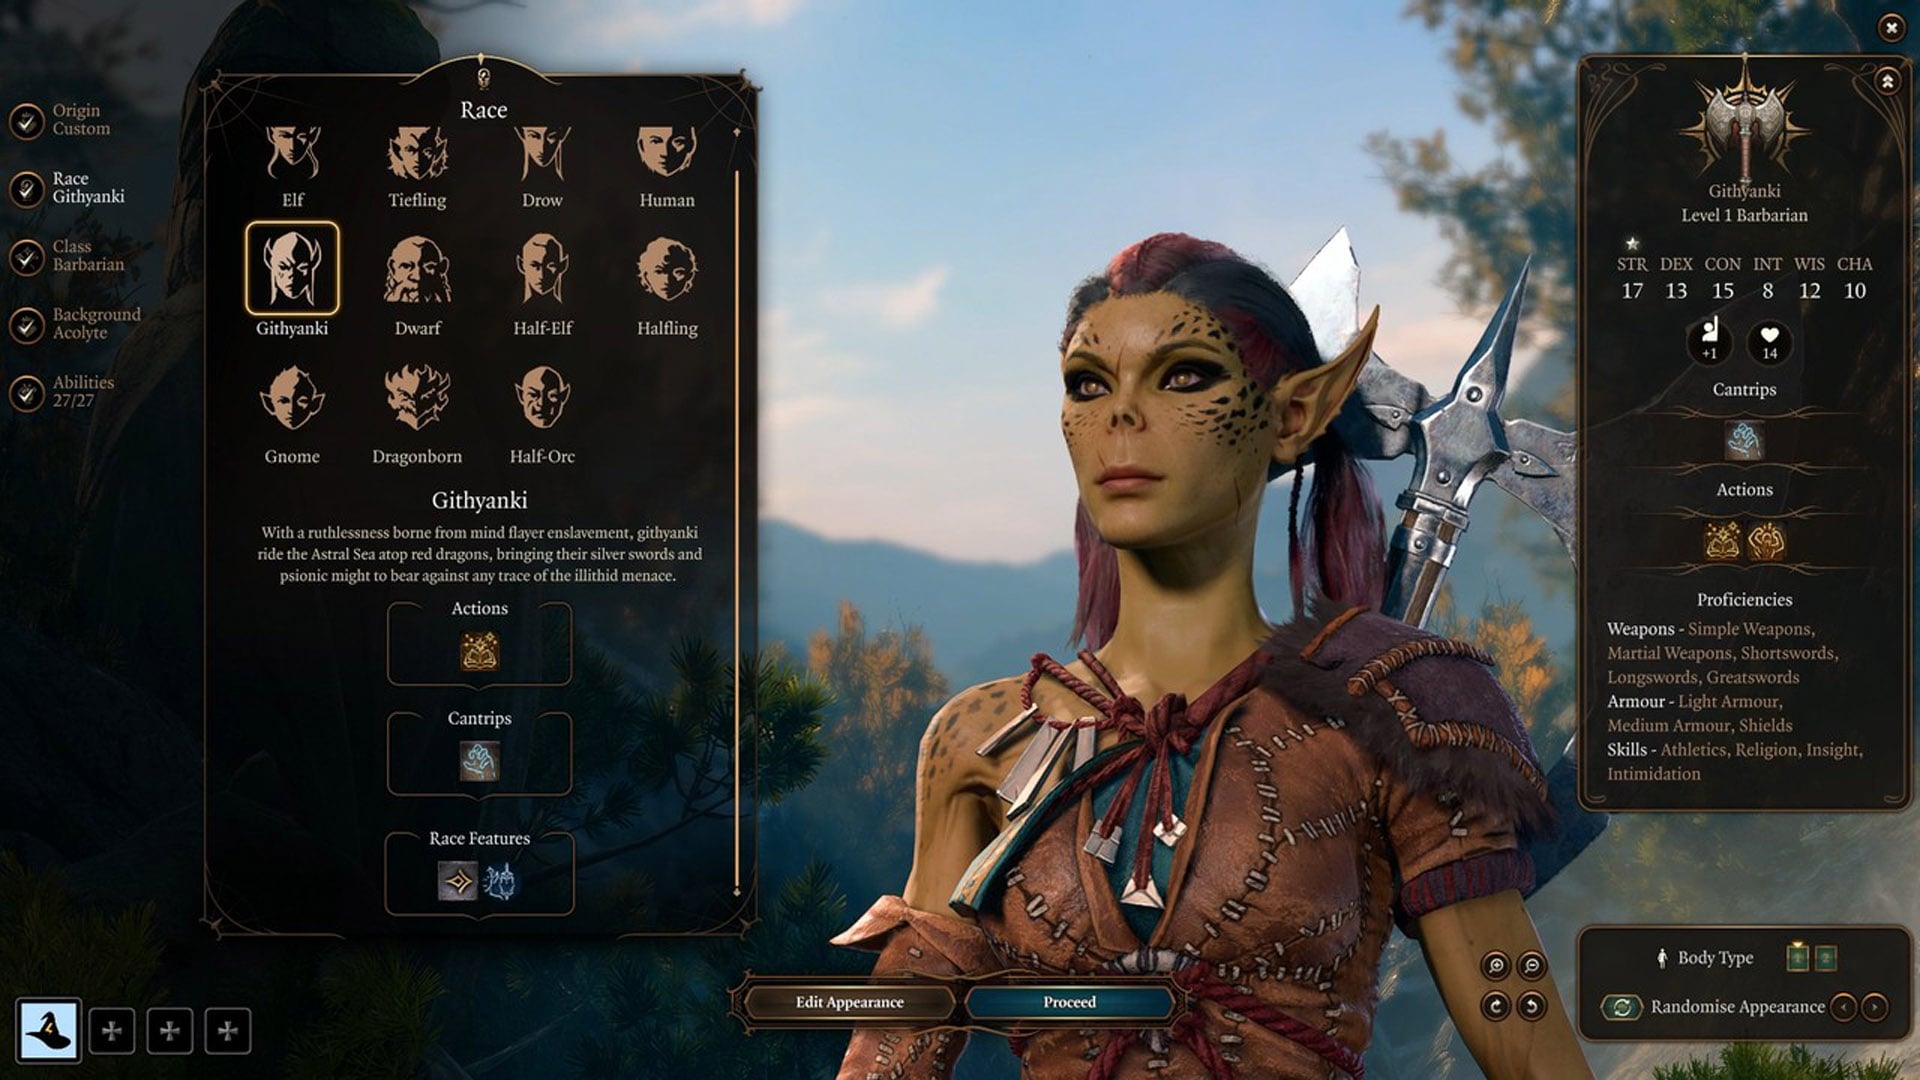 Illustration of character customization and narrative choices in Baldur's Gate 3, showcasing the depth of player-driven storytelling